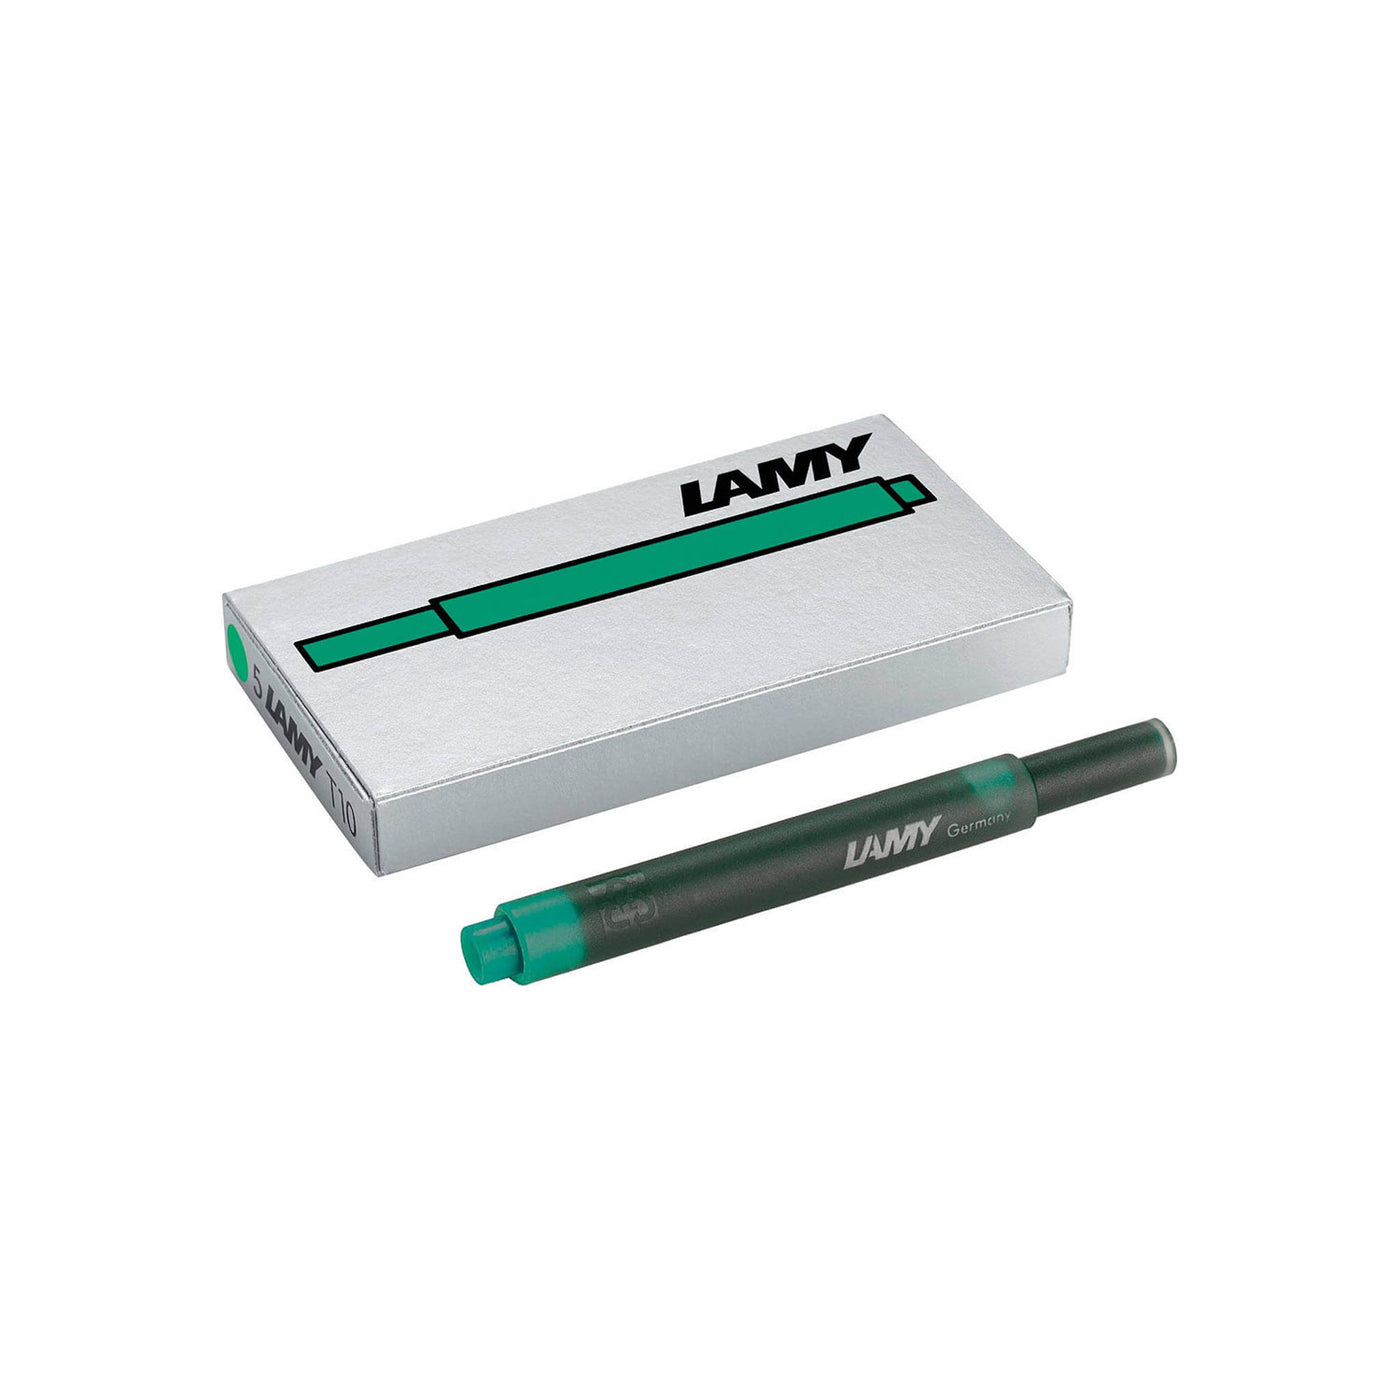 Lamy T10 Ink Cartridge Pack of 5 - Green